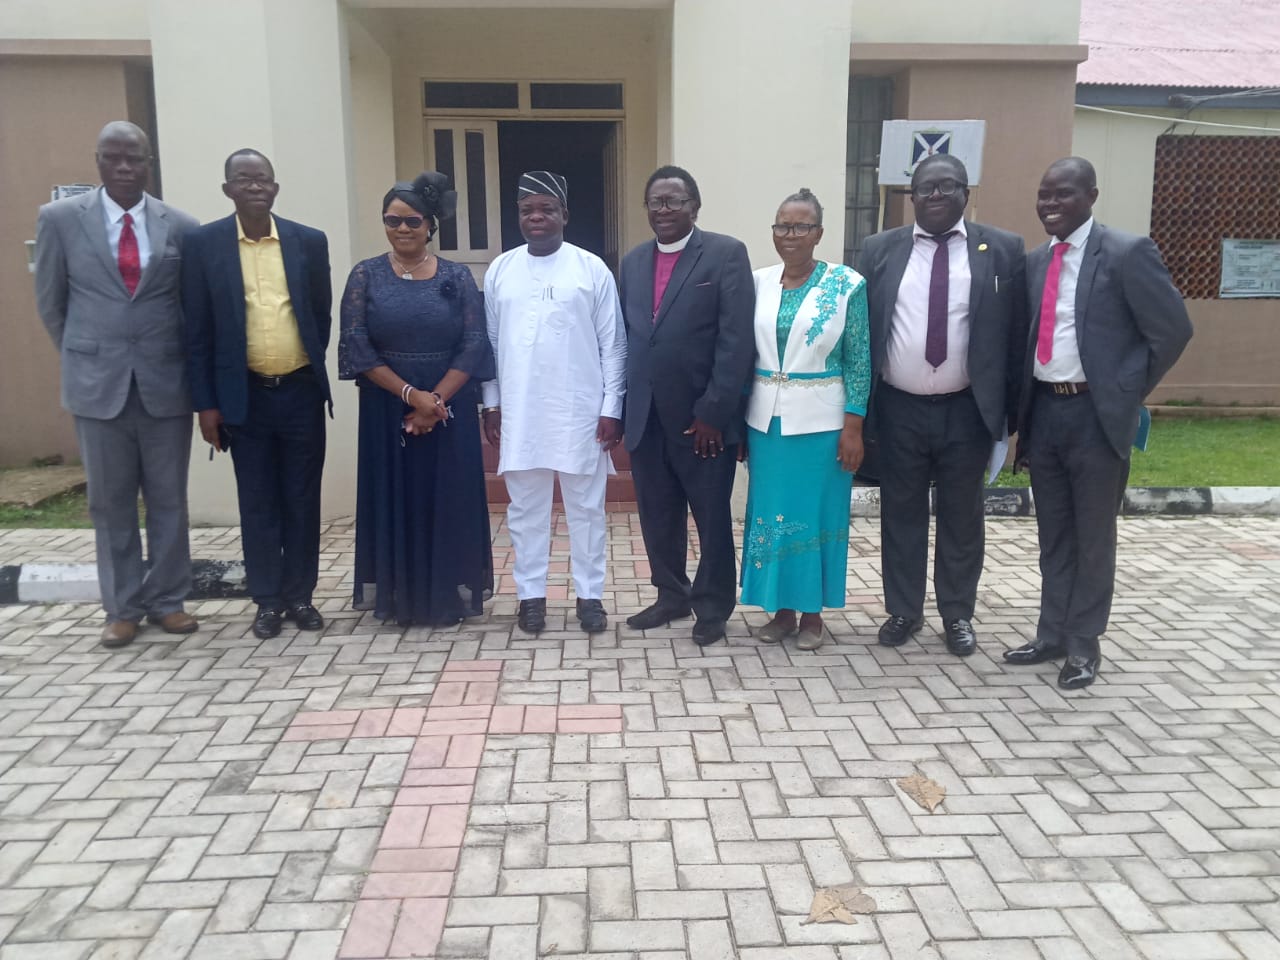 AJAYI CROWTHER UNIVERSITY SIGNS MOU WITH TRINITY SCHOOL OF MUSIC, IBADAN